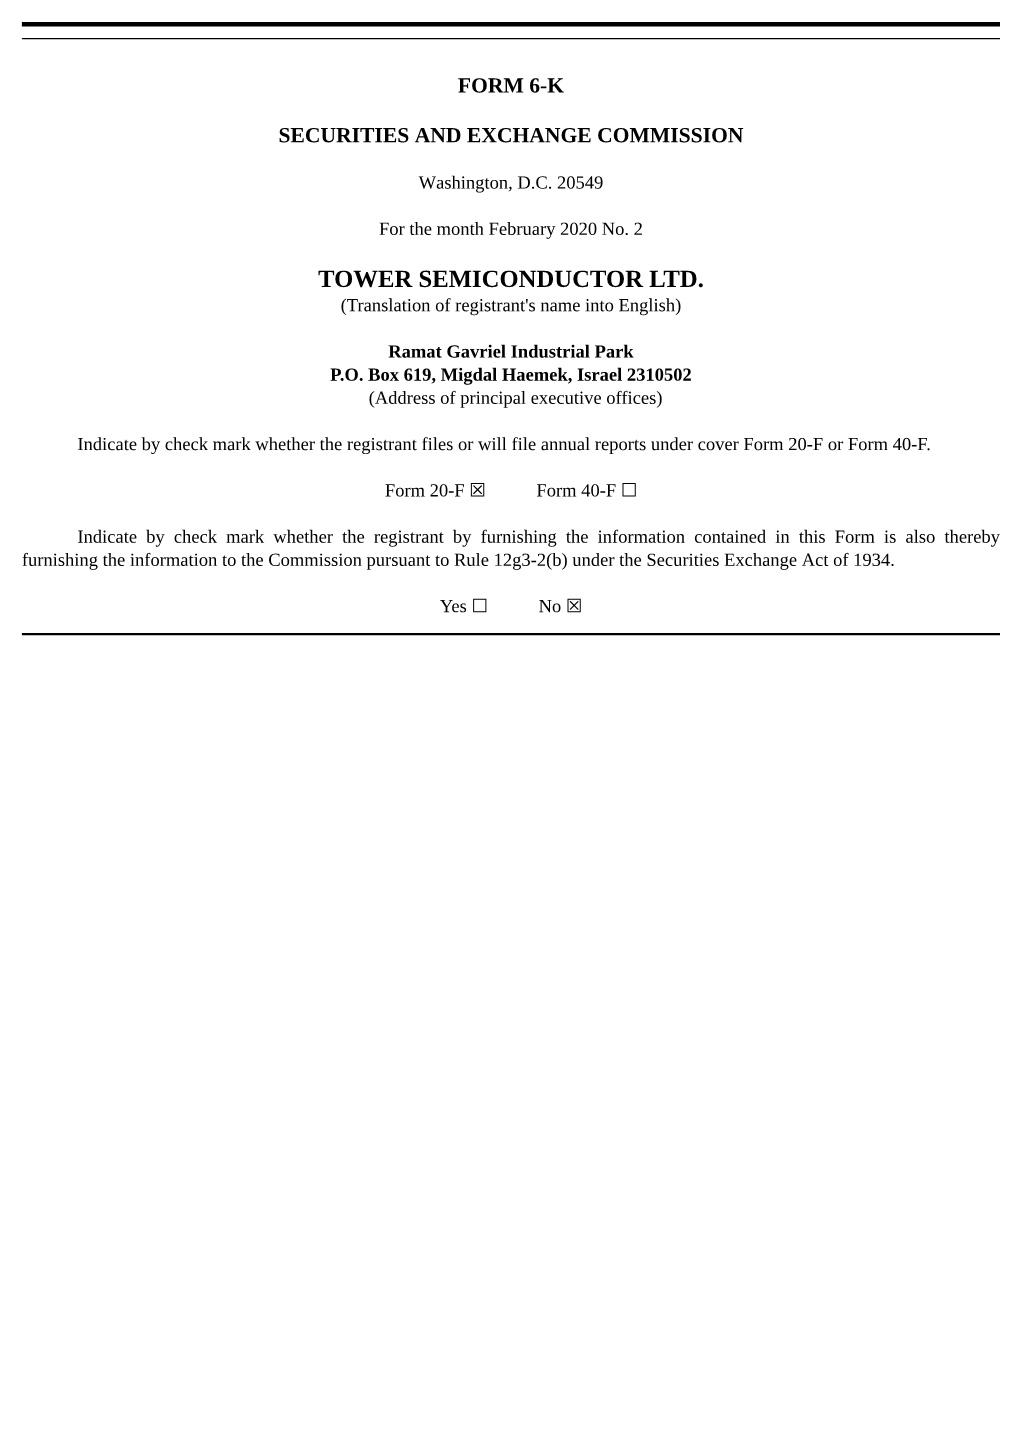 TOWER SEMICONDUCTOR LTD. (Translation of Registrant's Name Into English)